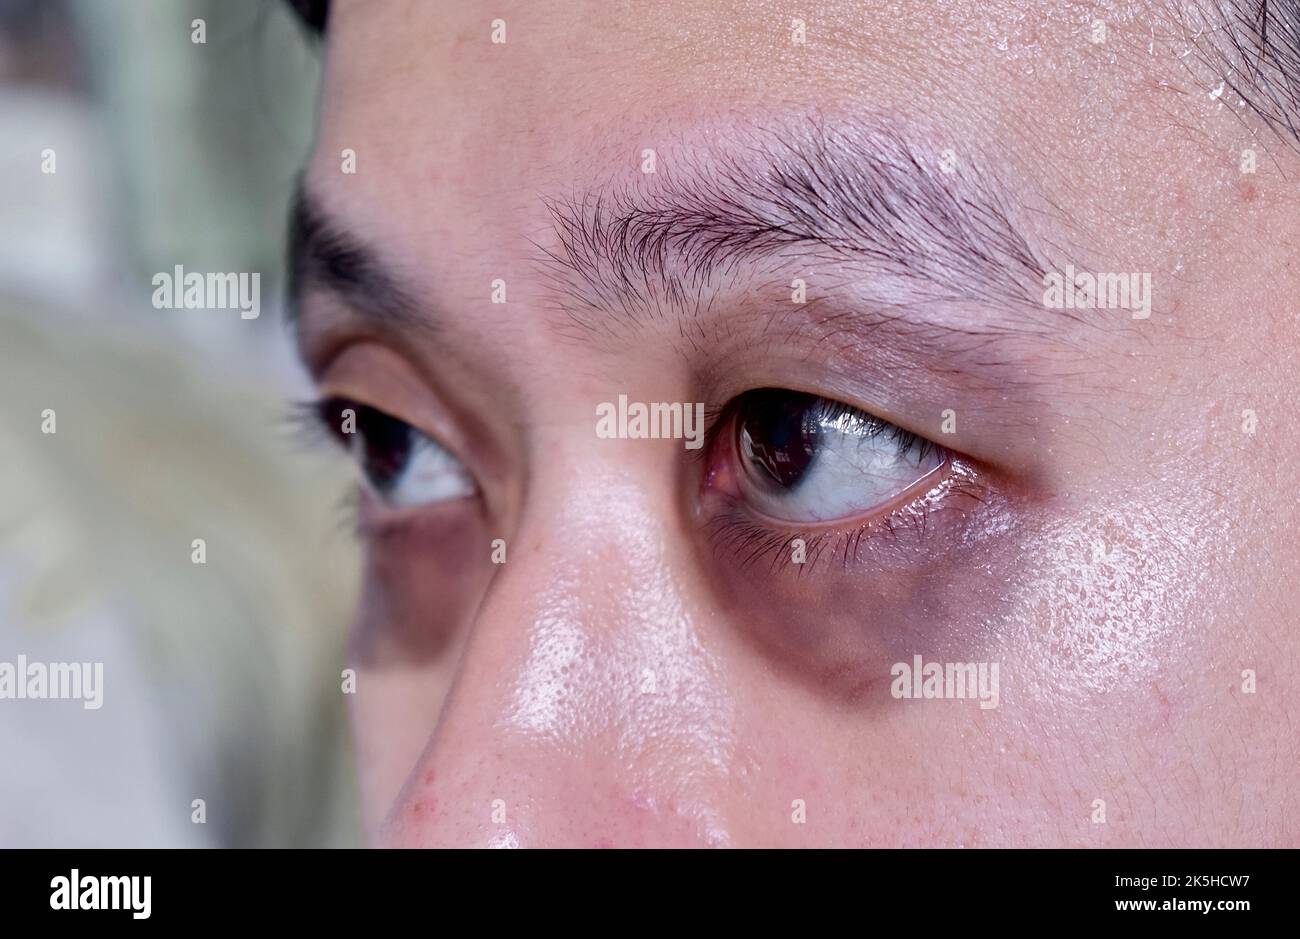 Raccon eyes or periorbital ecchymosis or panda eye sign in Southeast Asian male patient. It is a sign of basal skull fracture or subgaleal hematoma. Stock Photo